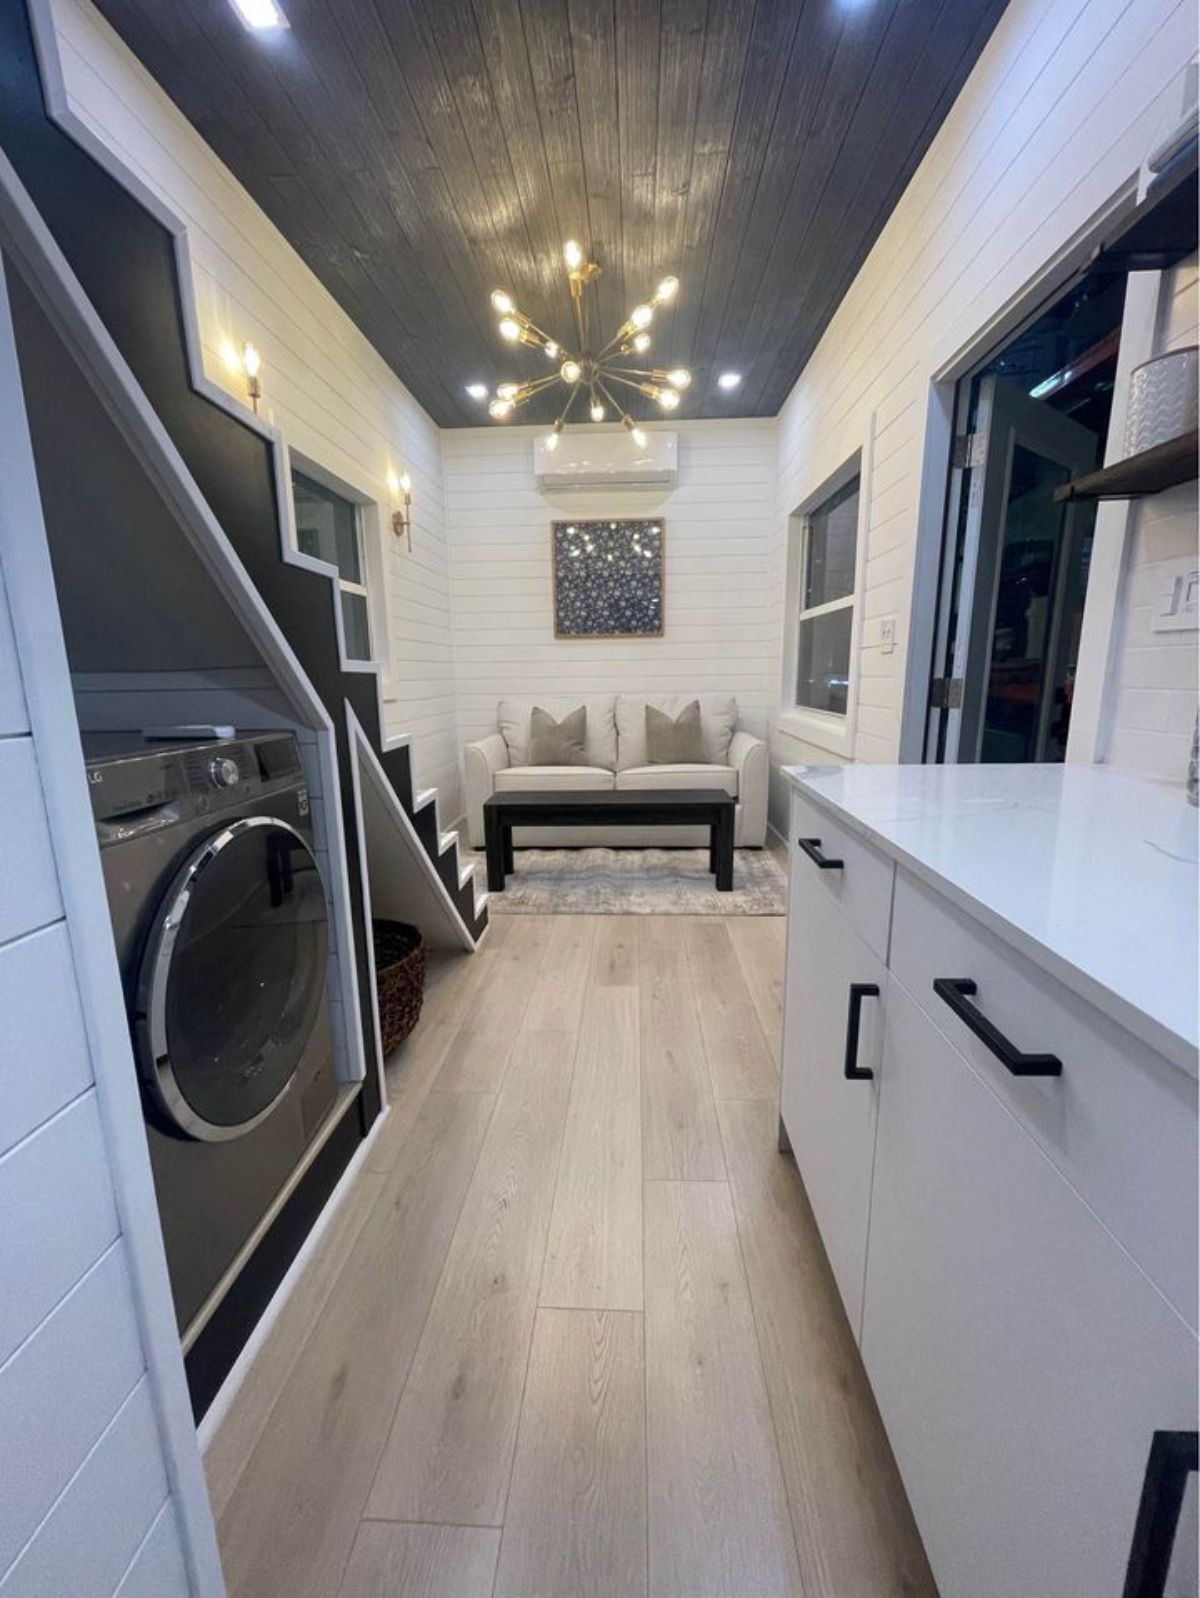 stainless steel combination washer and dryer on left under stairs with white cabinets and counter on right with black hardware